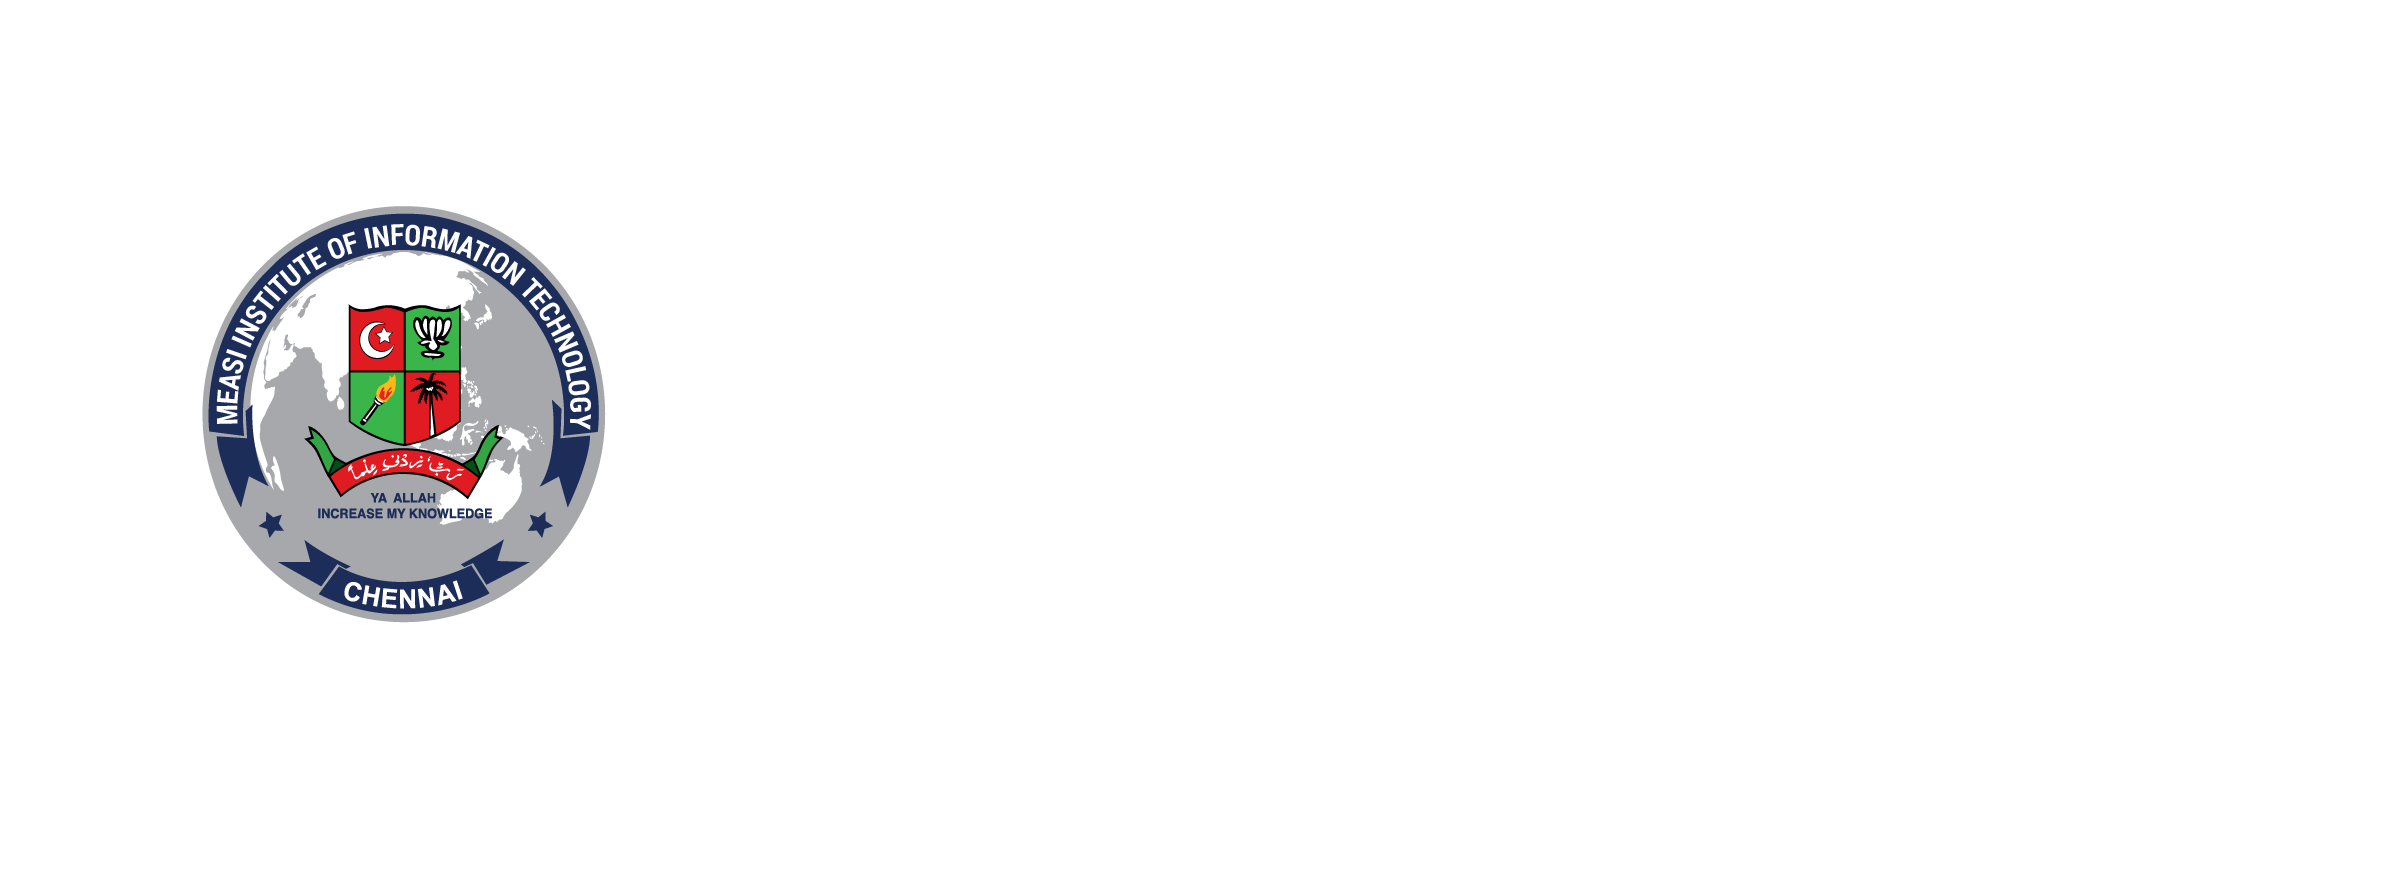 MEASI INSTITUTE OF INFORMATION TECHNOLOGY